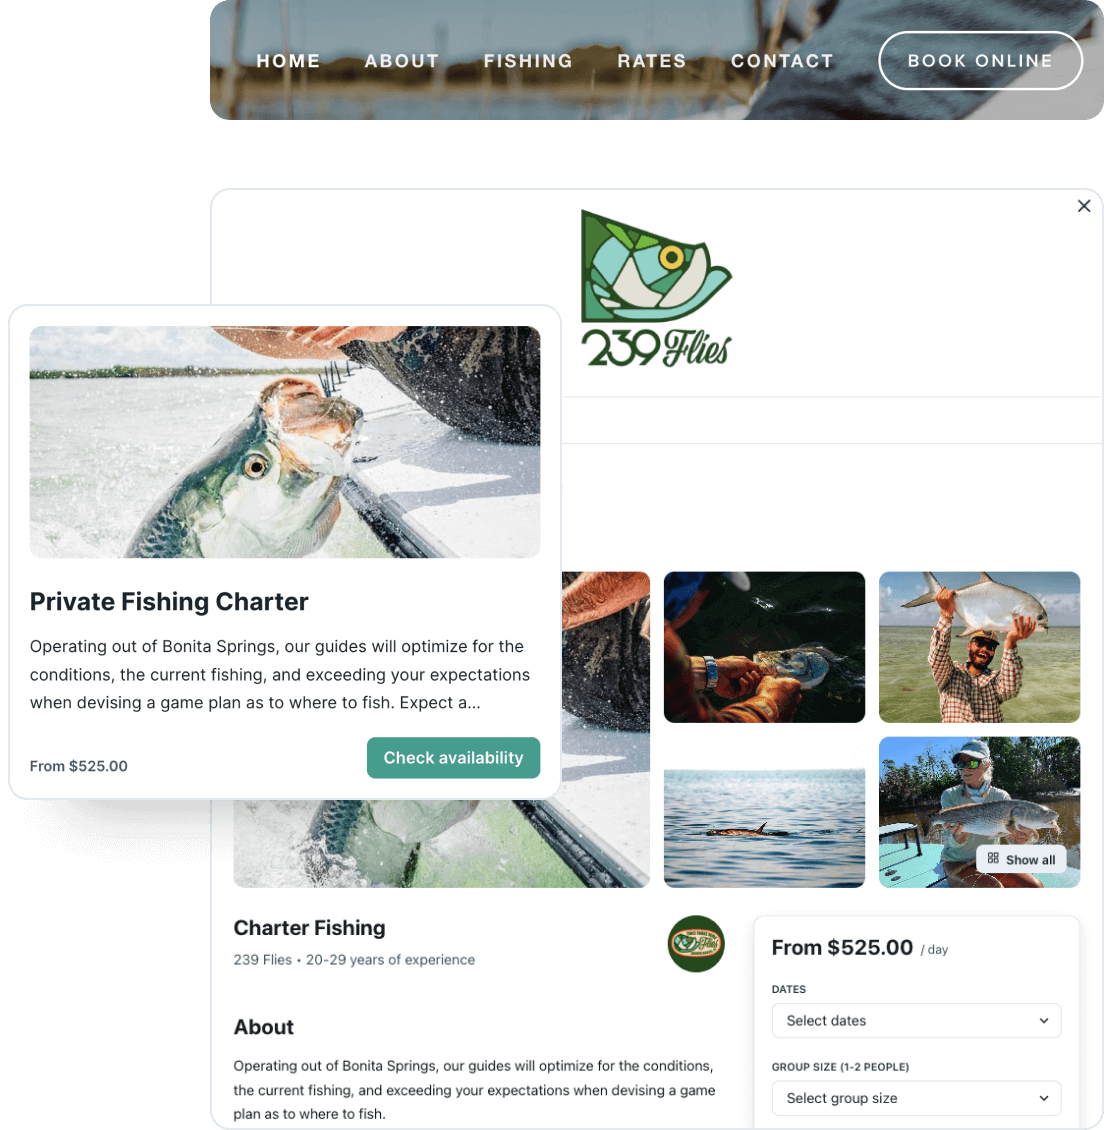 Features from the 239 Flies website integration, showing their website's navigation bar, their Private Fishing Charter booking, and the listing details page